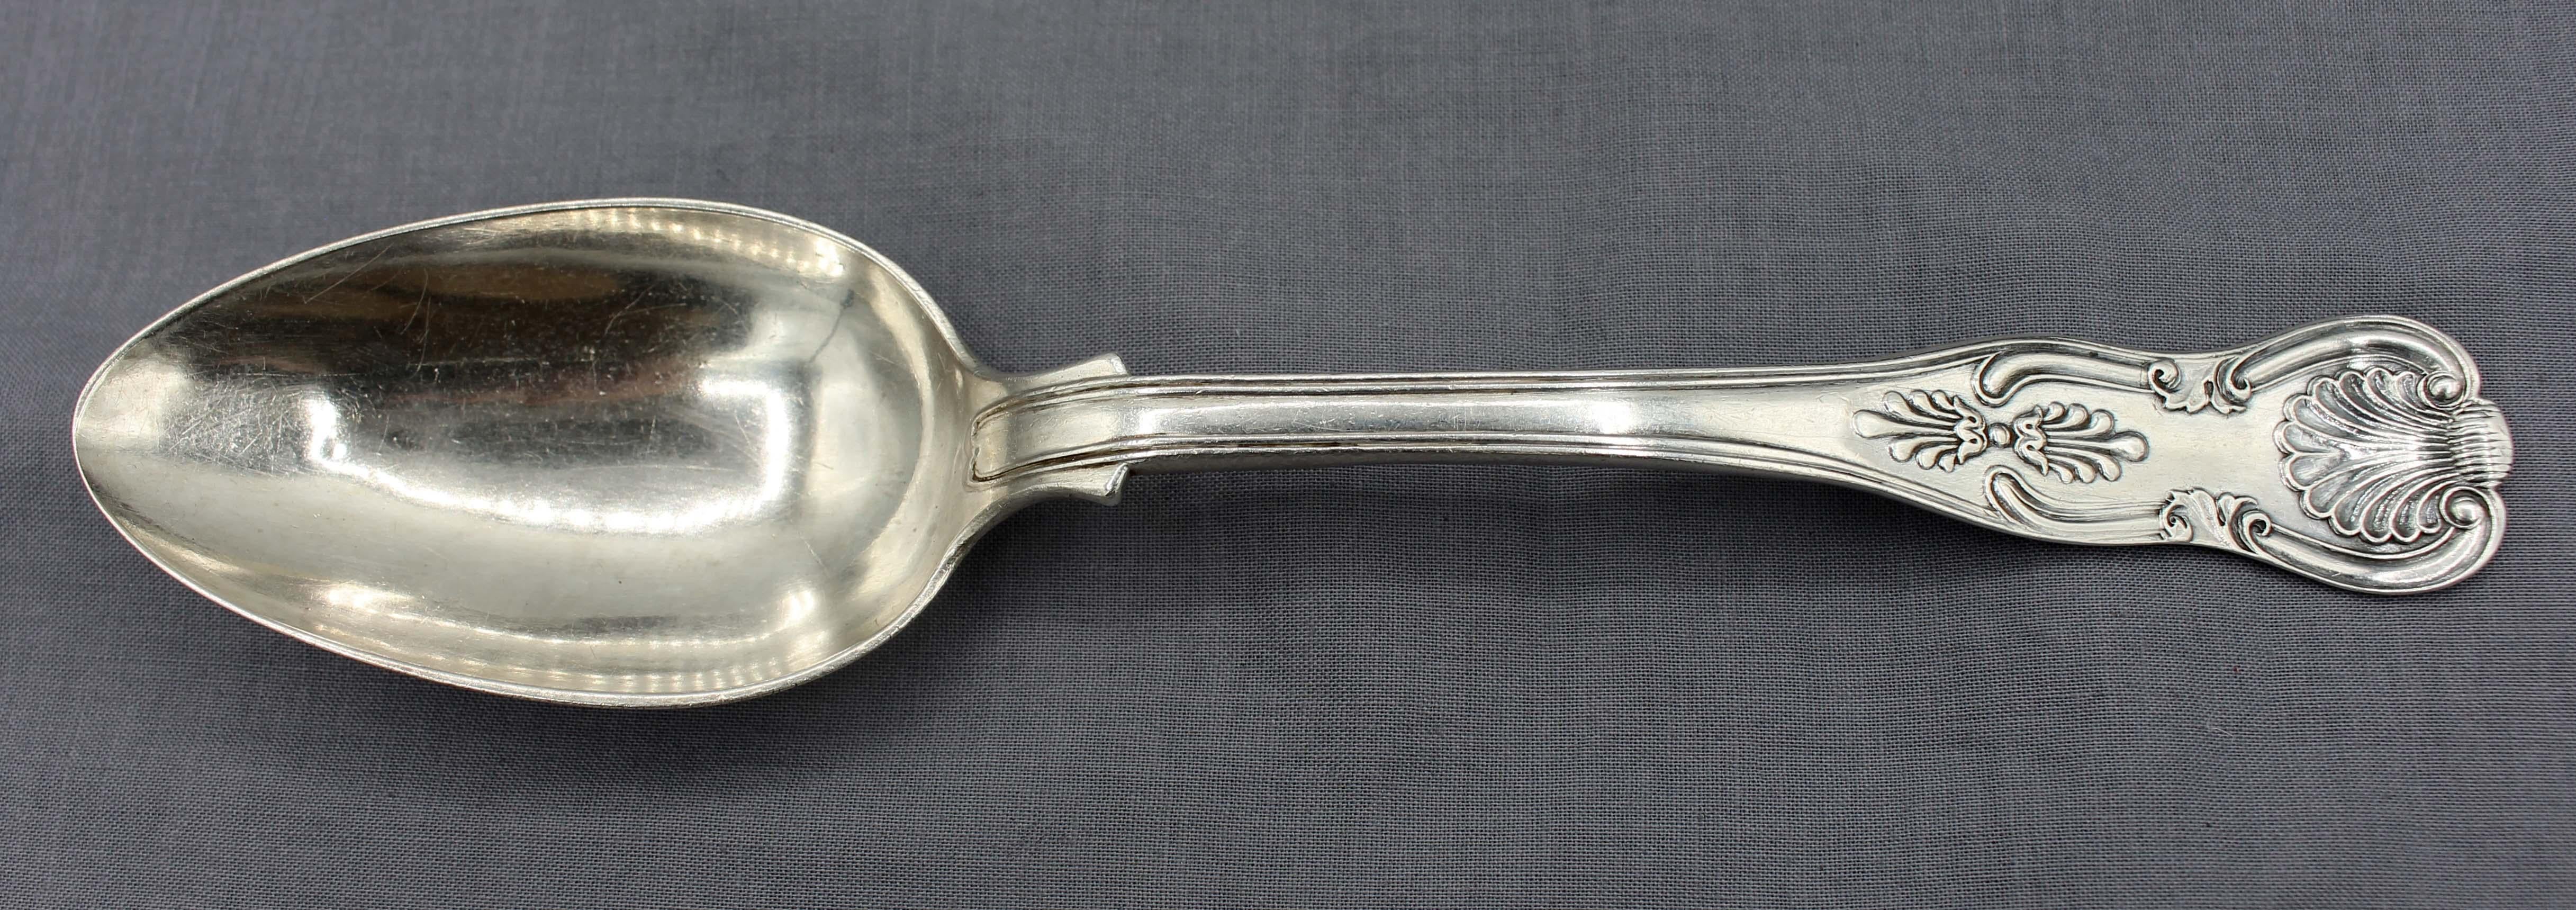 types of silver spoons